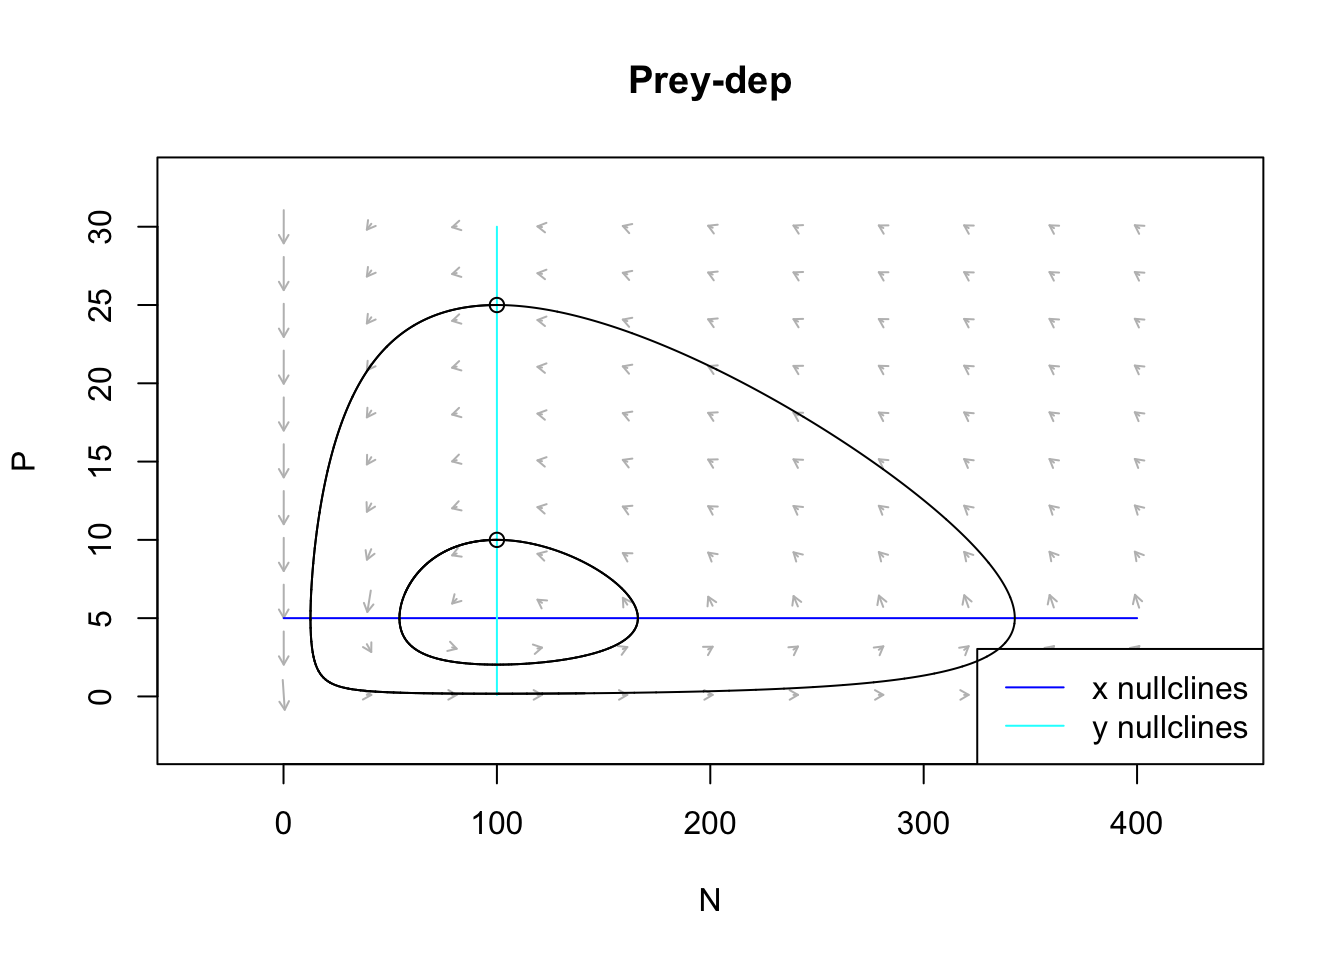 *Damped oscillations can arise with prey negative density dependence, and a type II predator funcional response. Arrows indicate the direction of changing population sizes. The black lines are tractories based on two different initial abundances. The nullclines are the zero net growth isoclines for the prey (x) and the predator (y). Based on the arrow heads, we can see that the trajectories oscillate in a counterclockwise direction.*